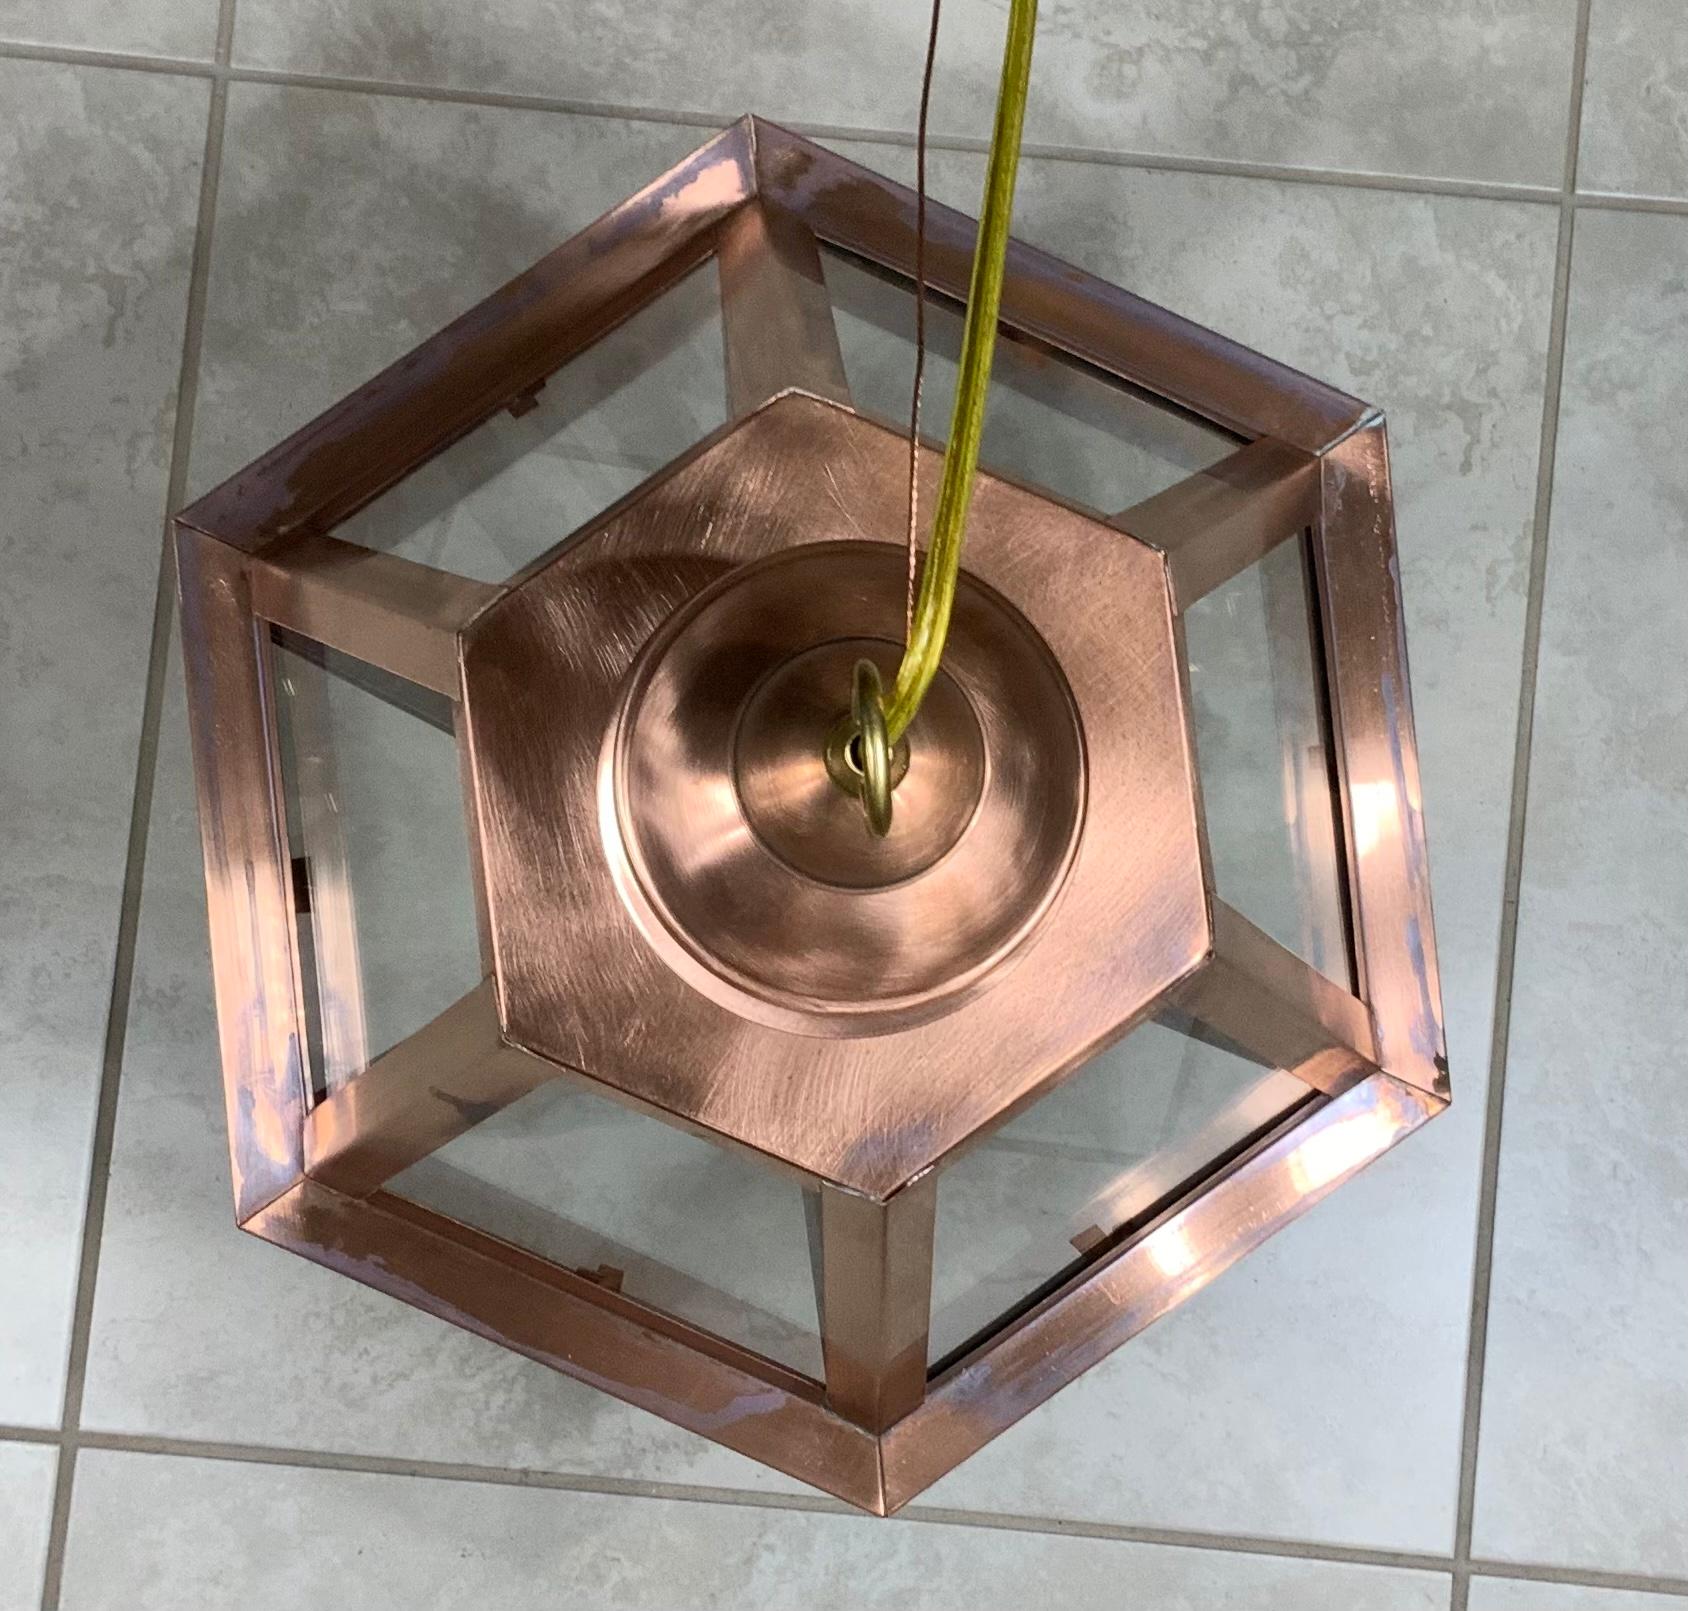 Exceptional six side custom made hanging lantern made of handcrafted solid copper and brass stem with four 60/watt lights, suitable for wet location
Up to US code, UL approved, great look indoor outdoor. Copper canopy and chain included.